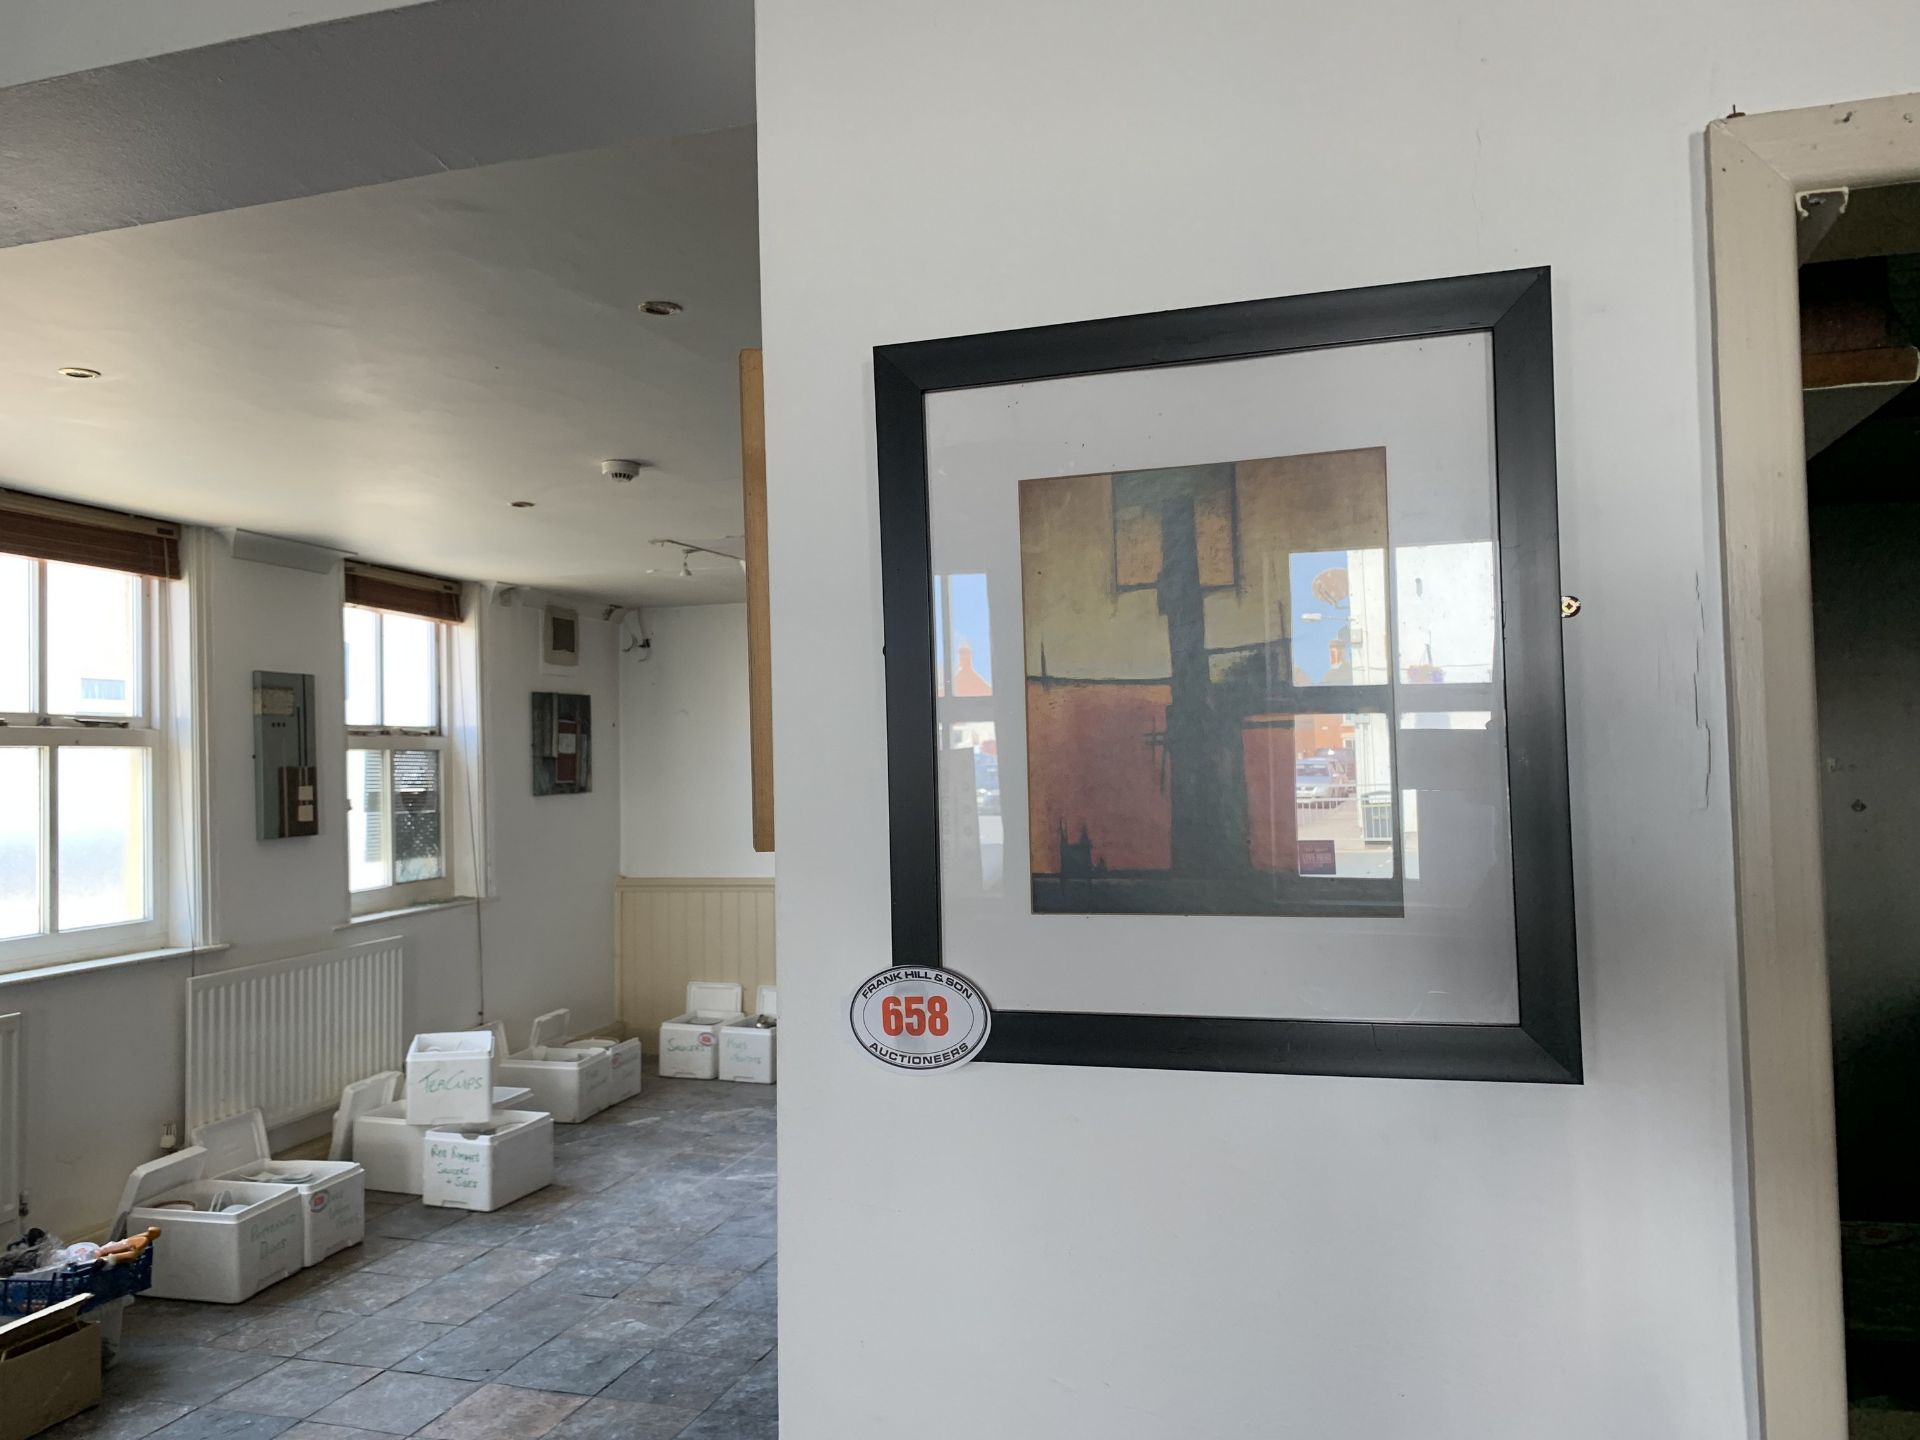 Approx 20 wall mounted pictures and blackboards (throughout the pub) - purchaser to remove